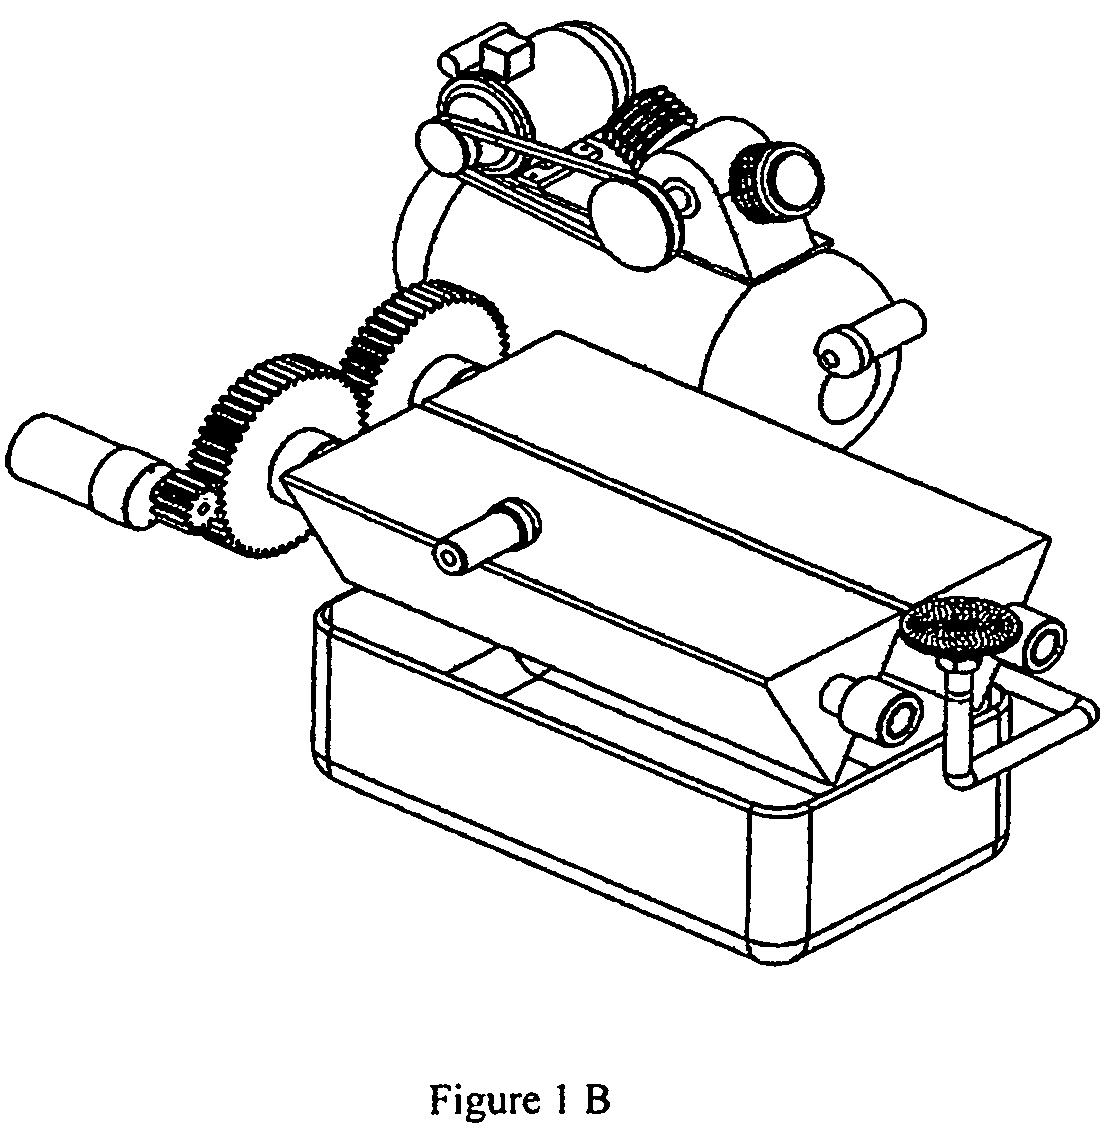 Apparatus and methods for automatic shoe cover stripping